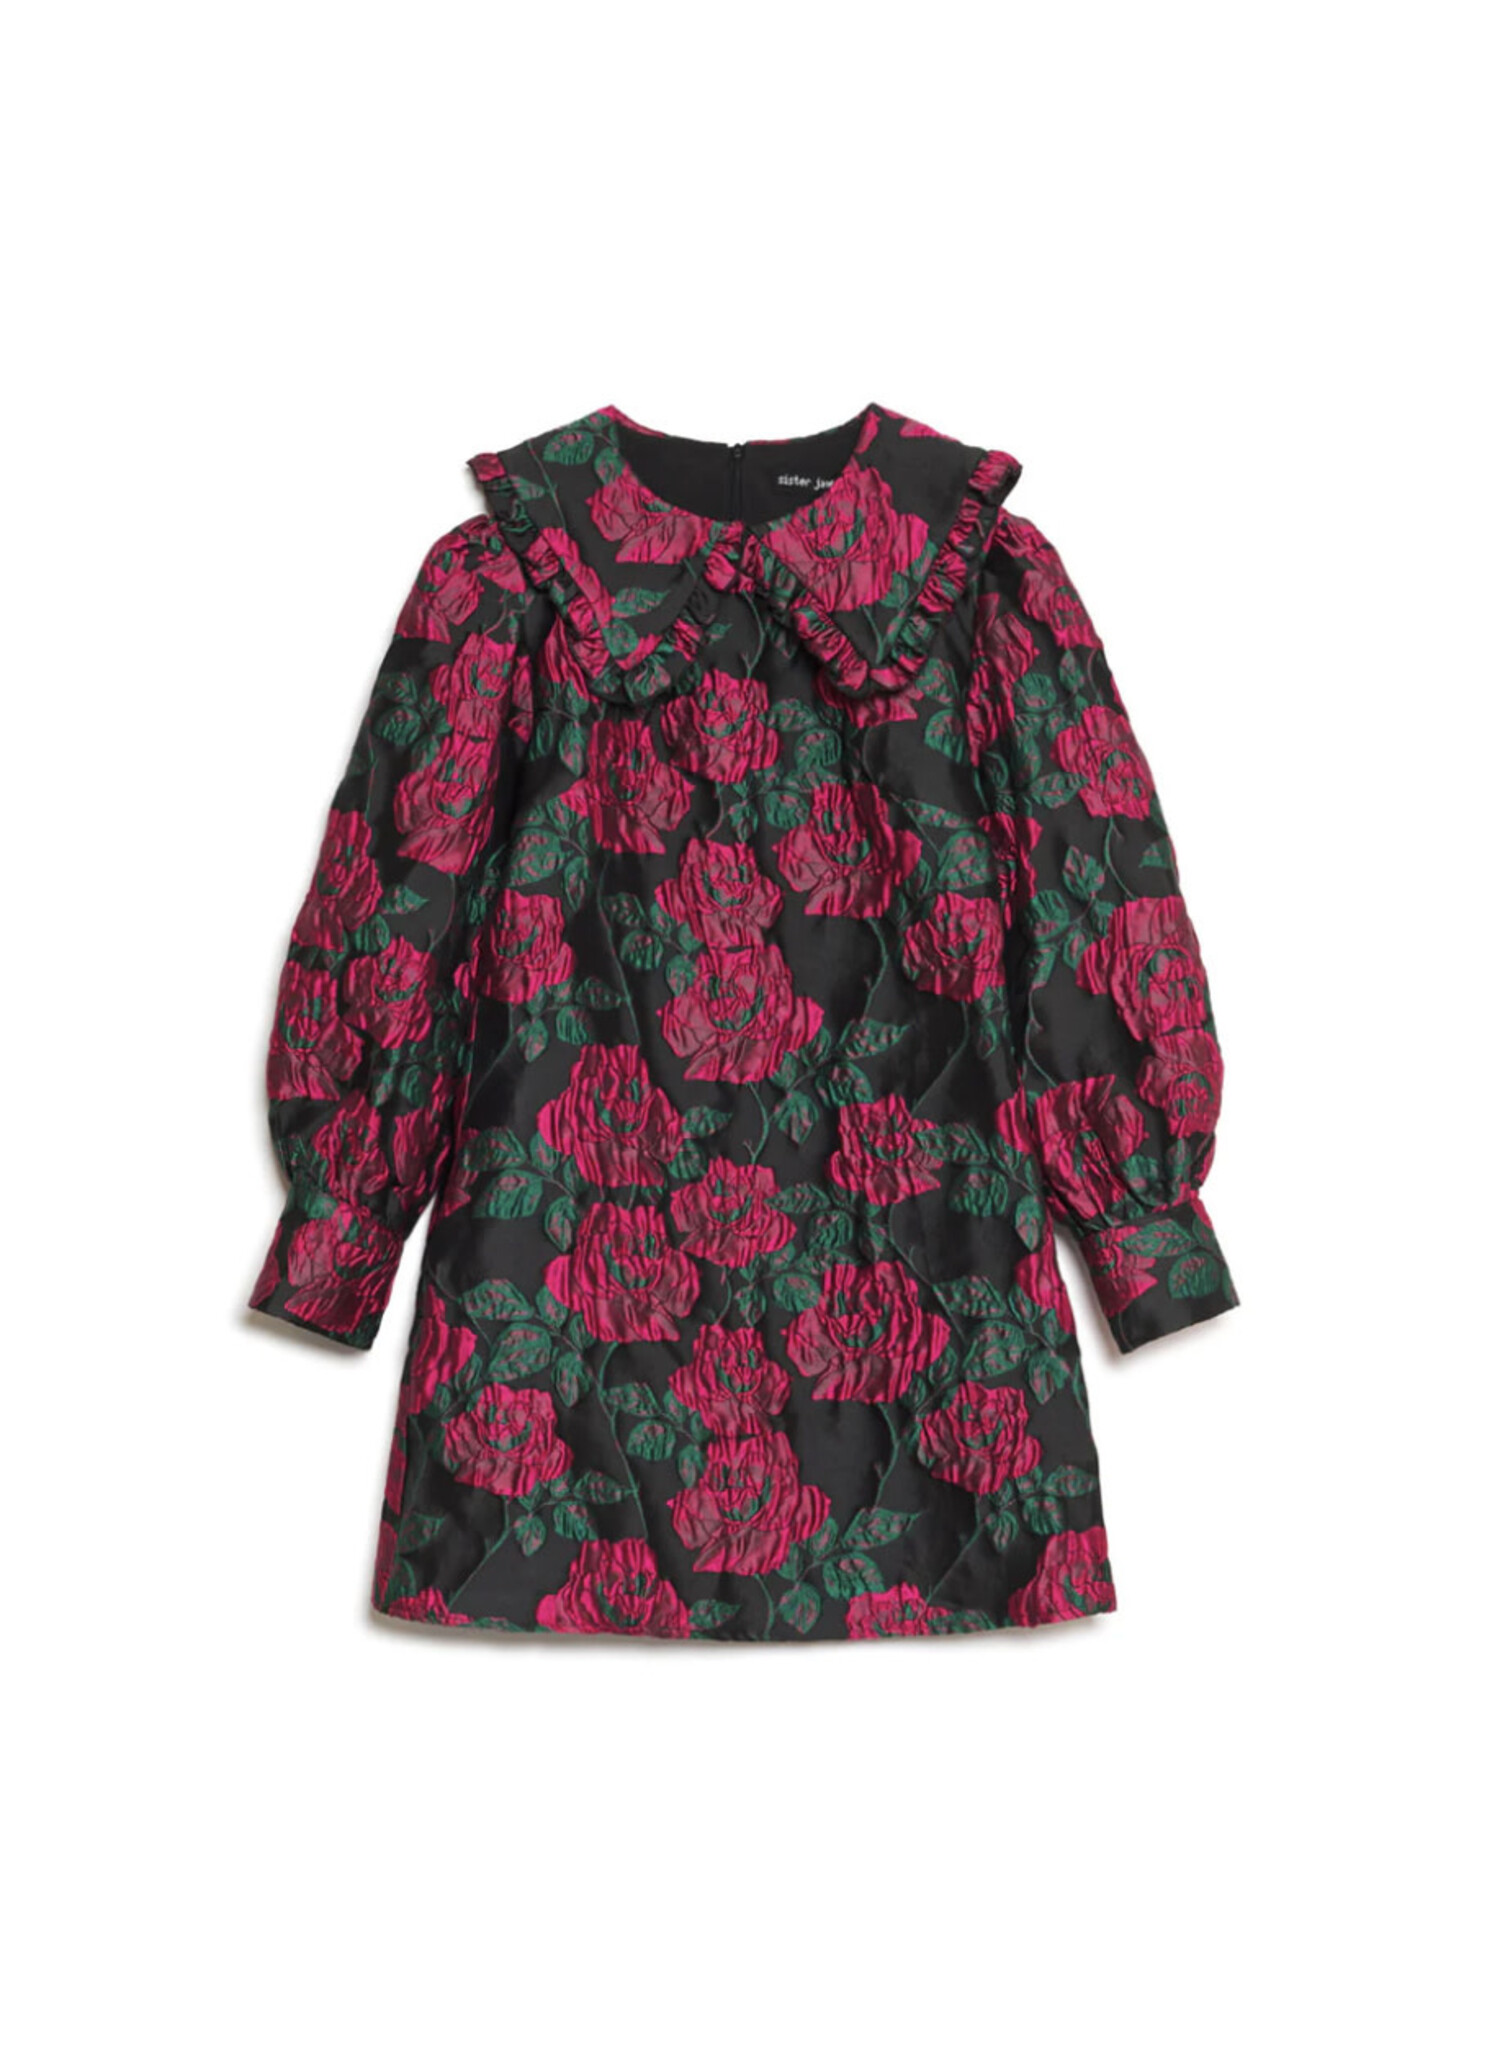 Canter Floral Jacquard Dress - Tulips in Little Rock